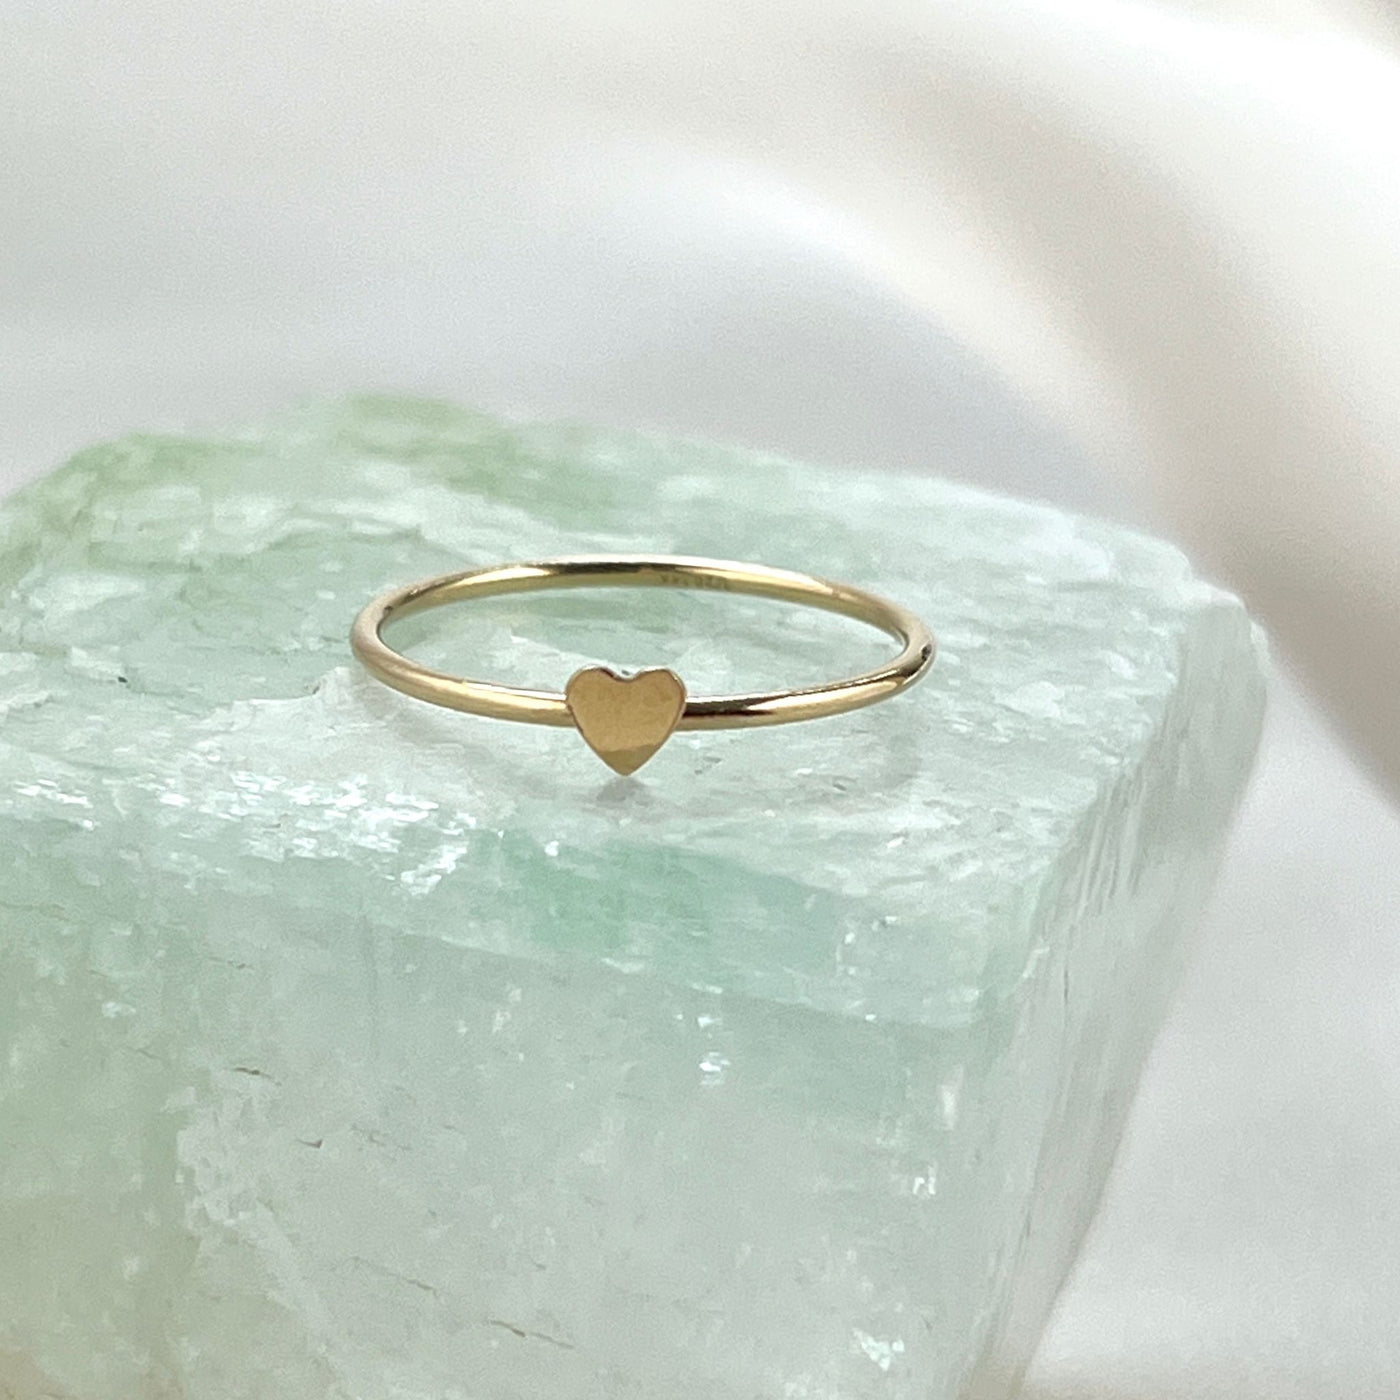 14K Gold filled simple band ring with tiny 2mm cut out heart shape on top. Gold heart ring is sitting onto of shiny  mint coloured crystal